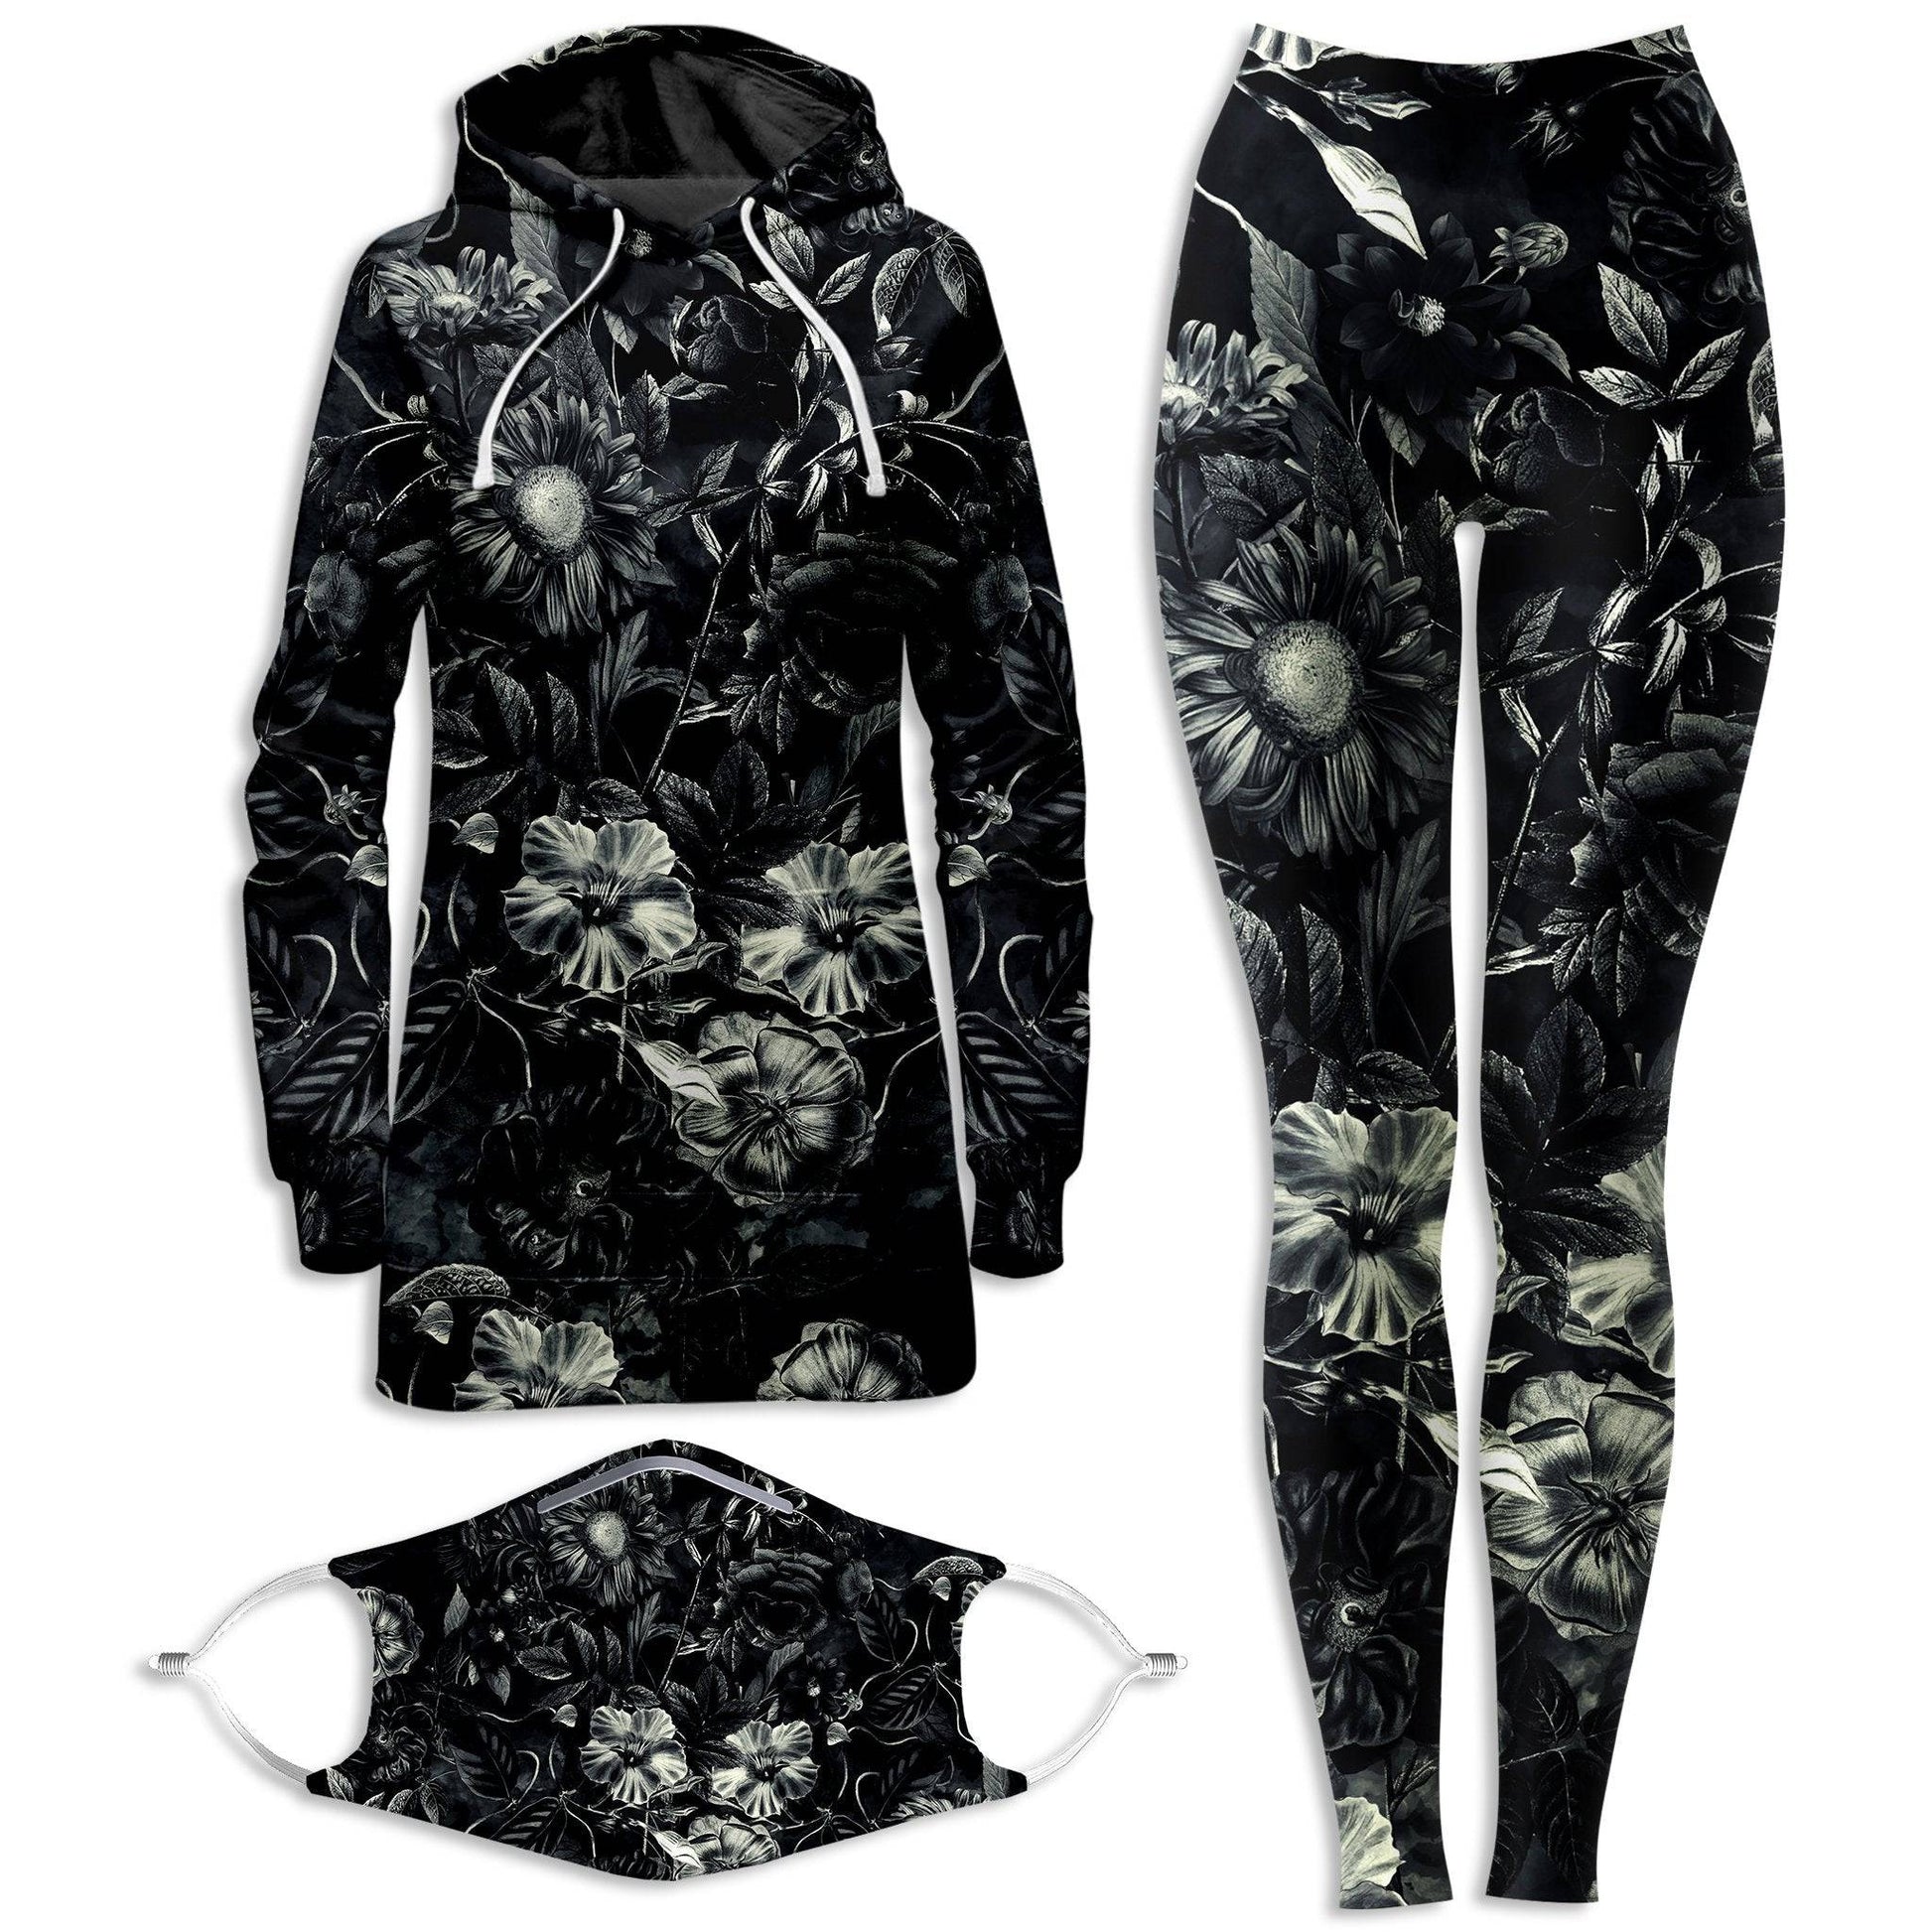 Darkness Hoodie Dress and Leggings with PM 2.5 Face Mask Combo, Riza Peker, | iEDM